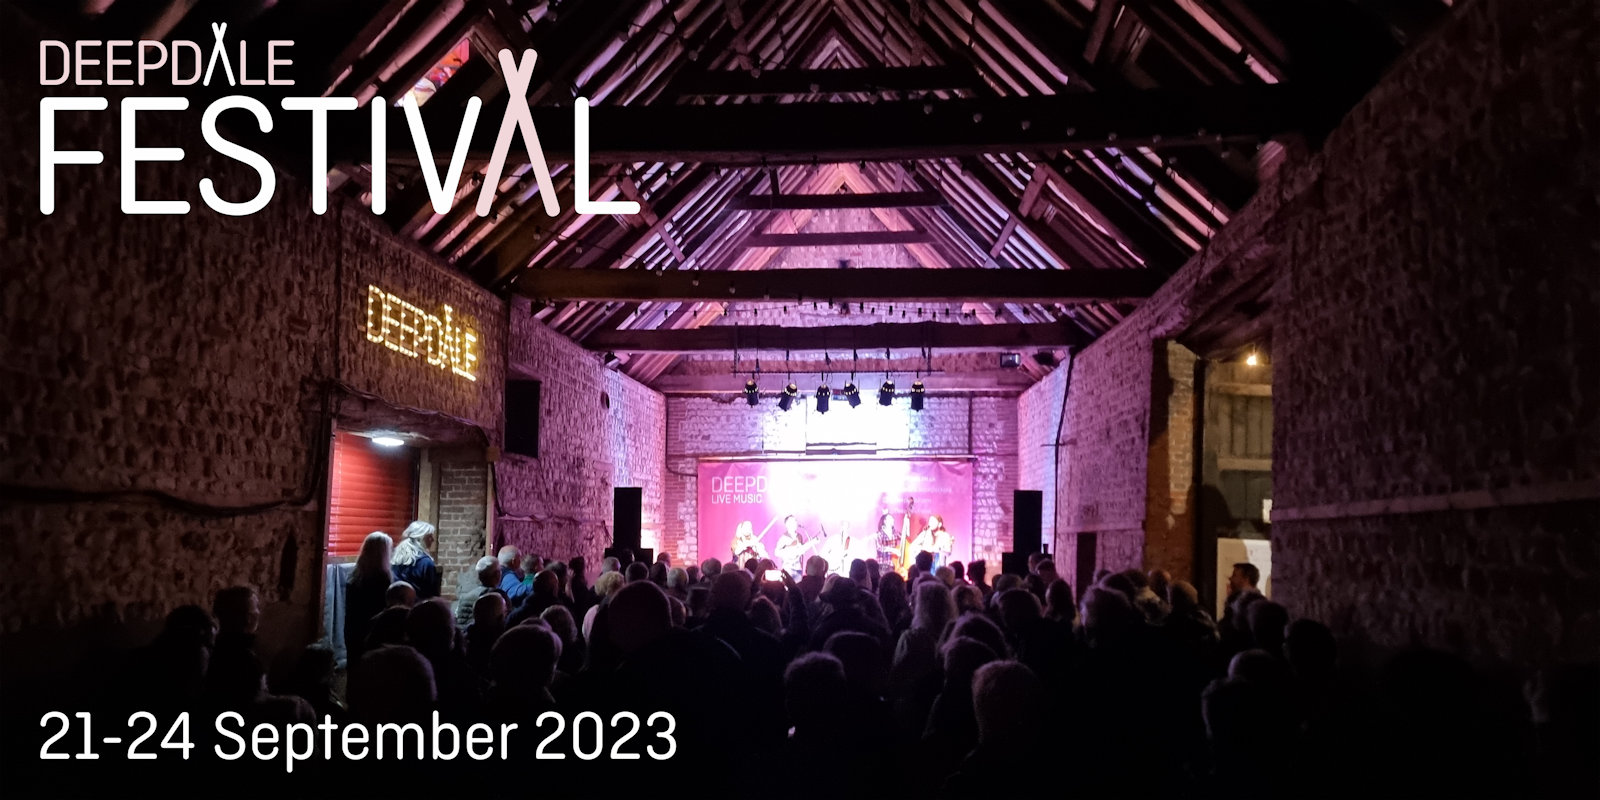 Deepdale Festival | Music Festival with a Heart of Folk | 21st to 24th September 2023